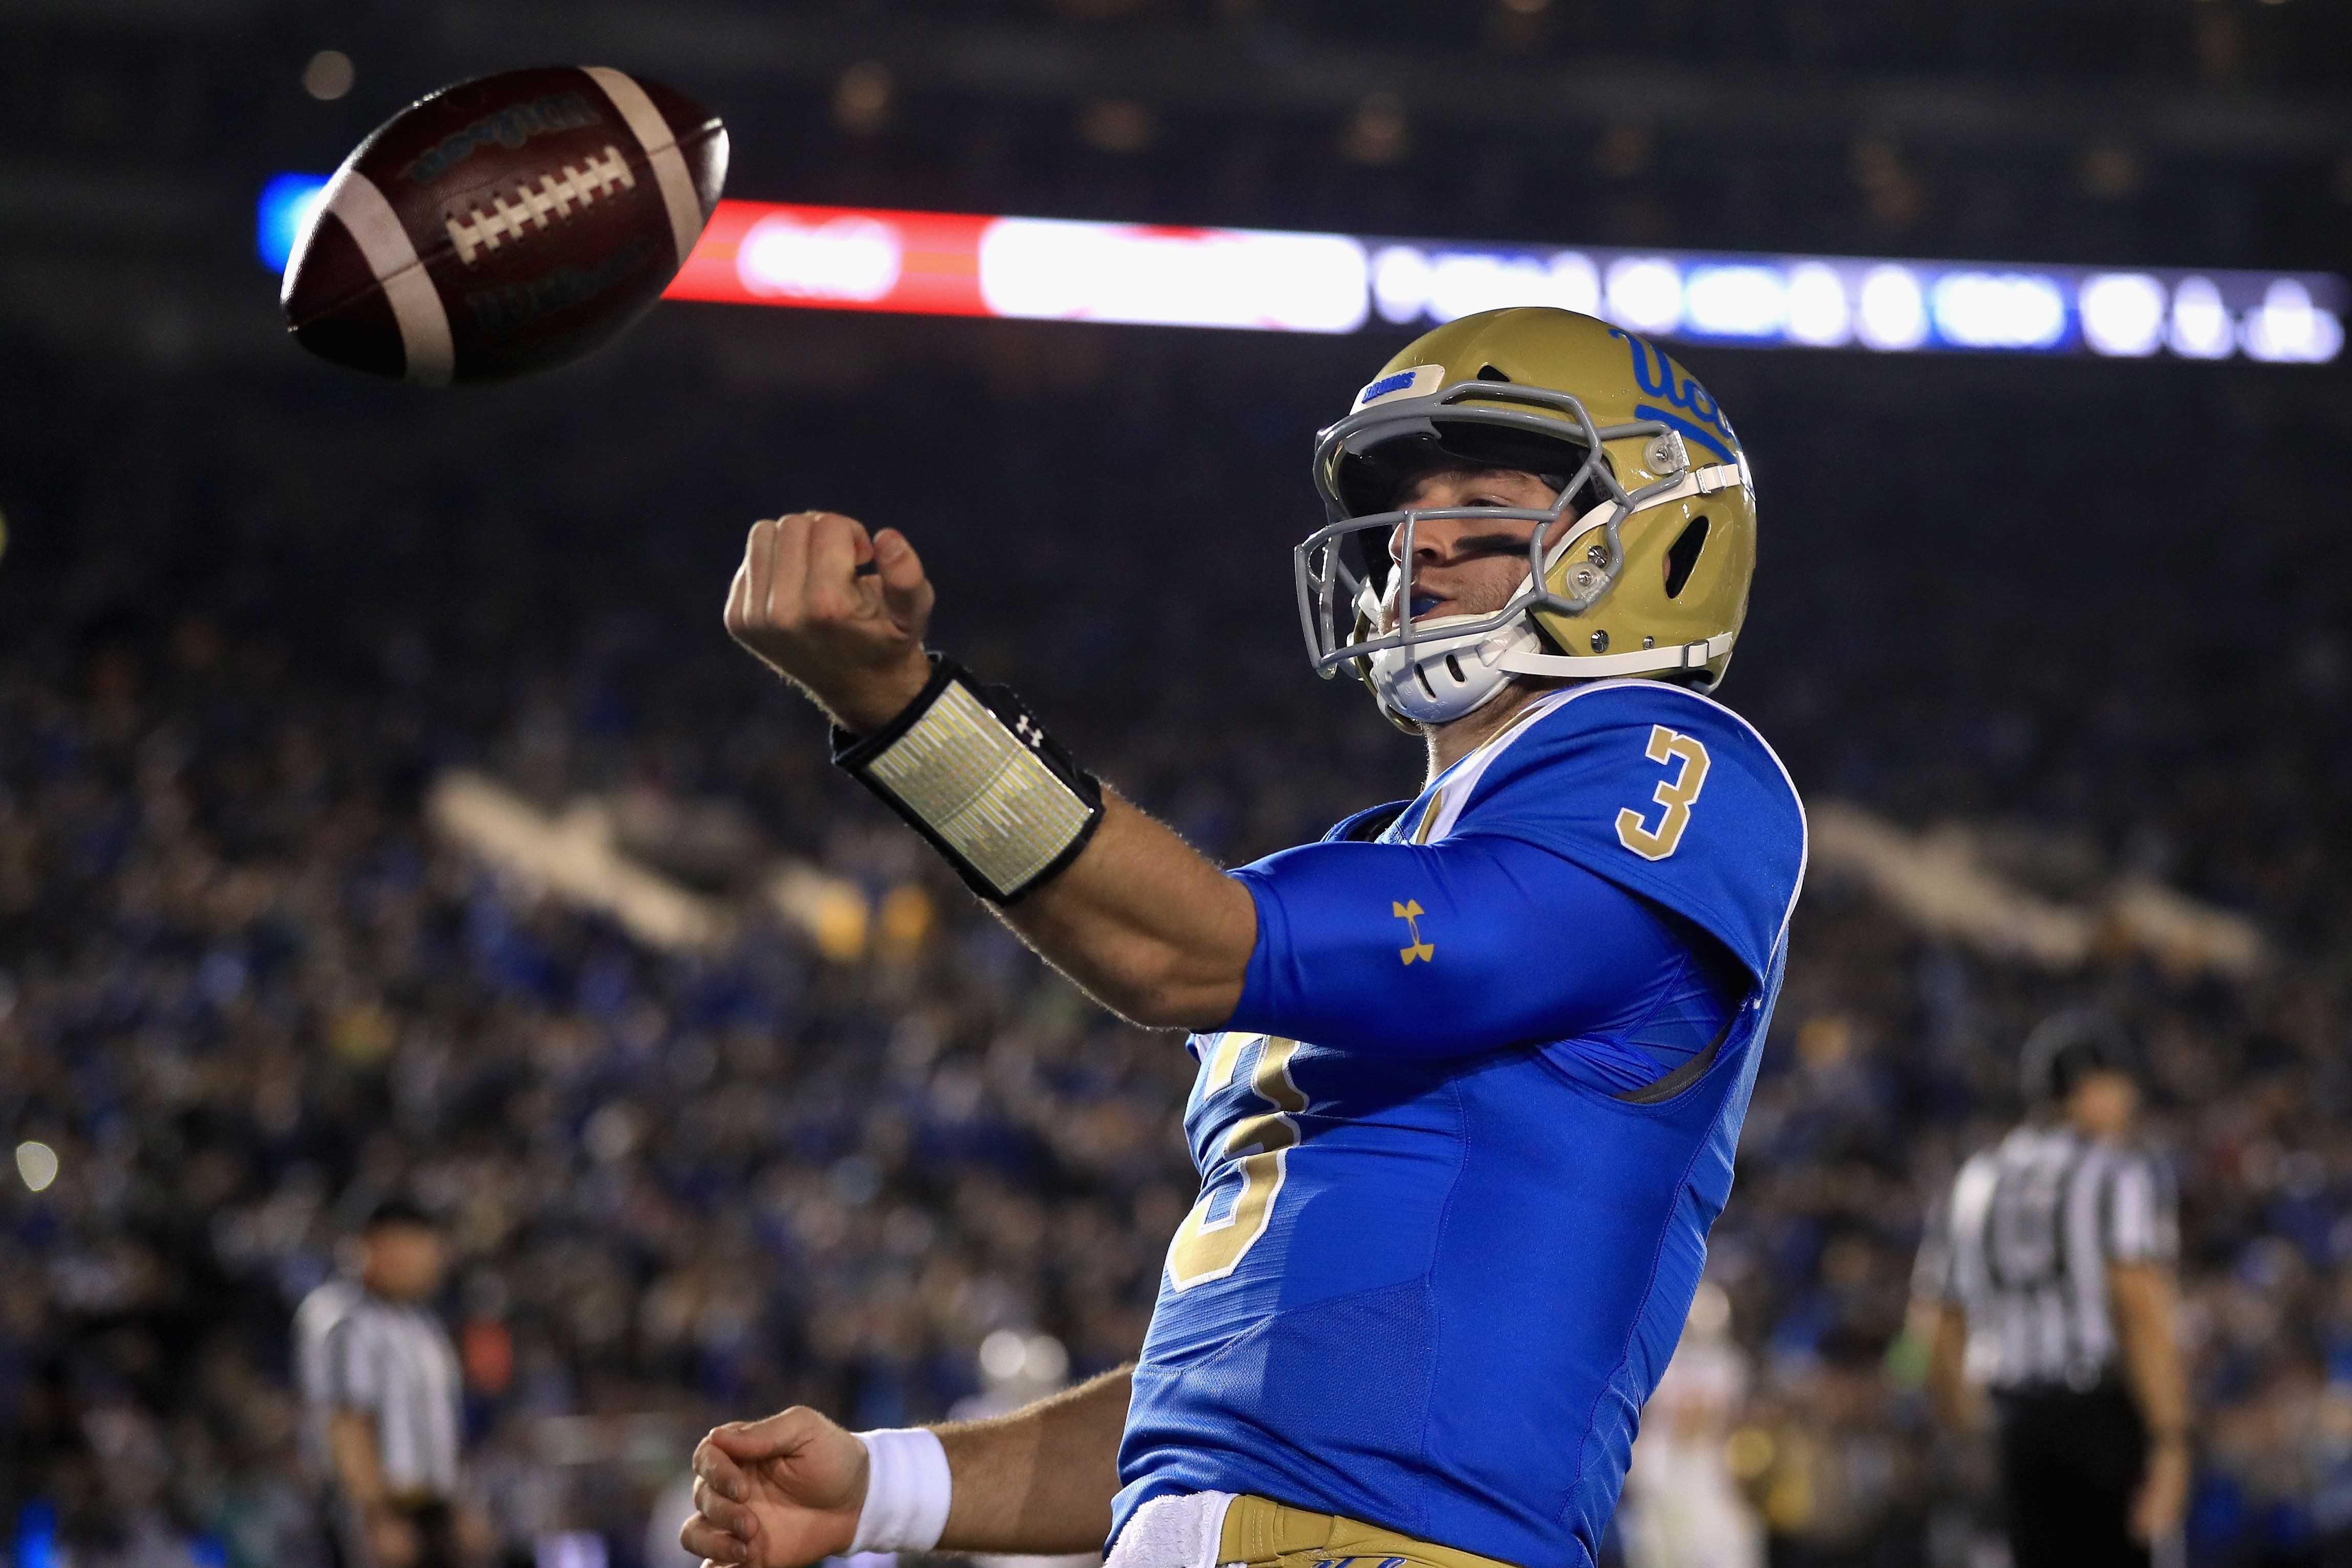 UCLA Football Bowl eligibility in sight after win over ASU; USC, Cal